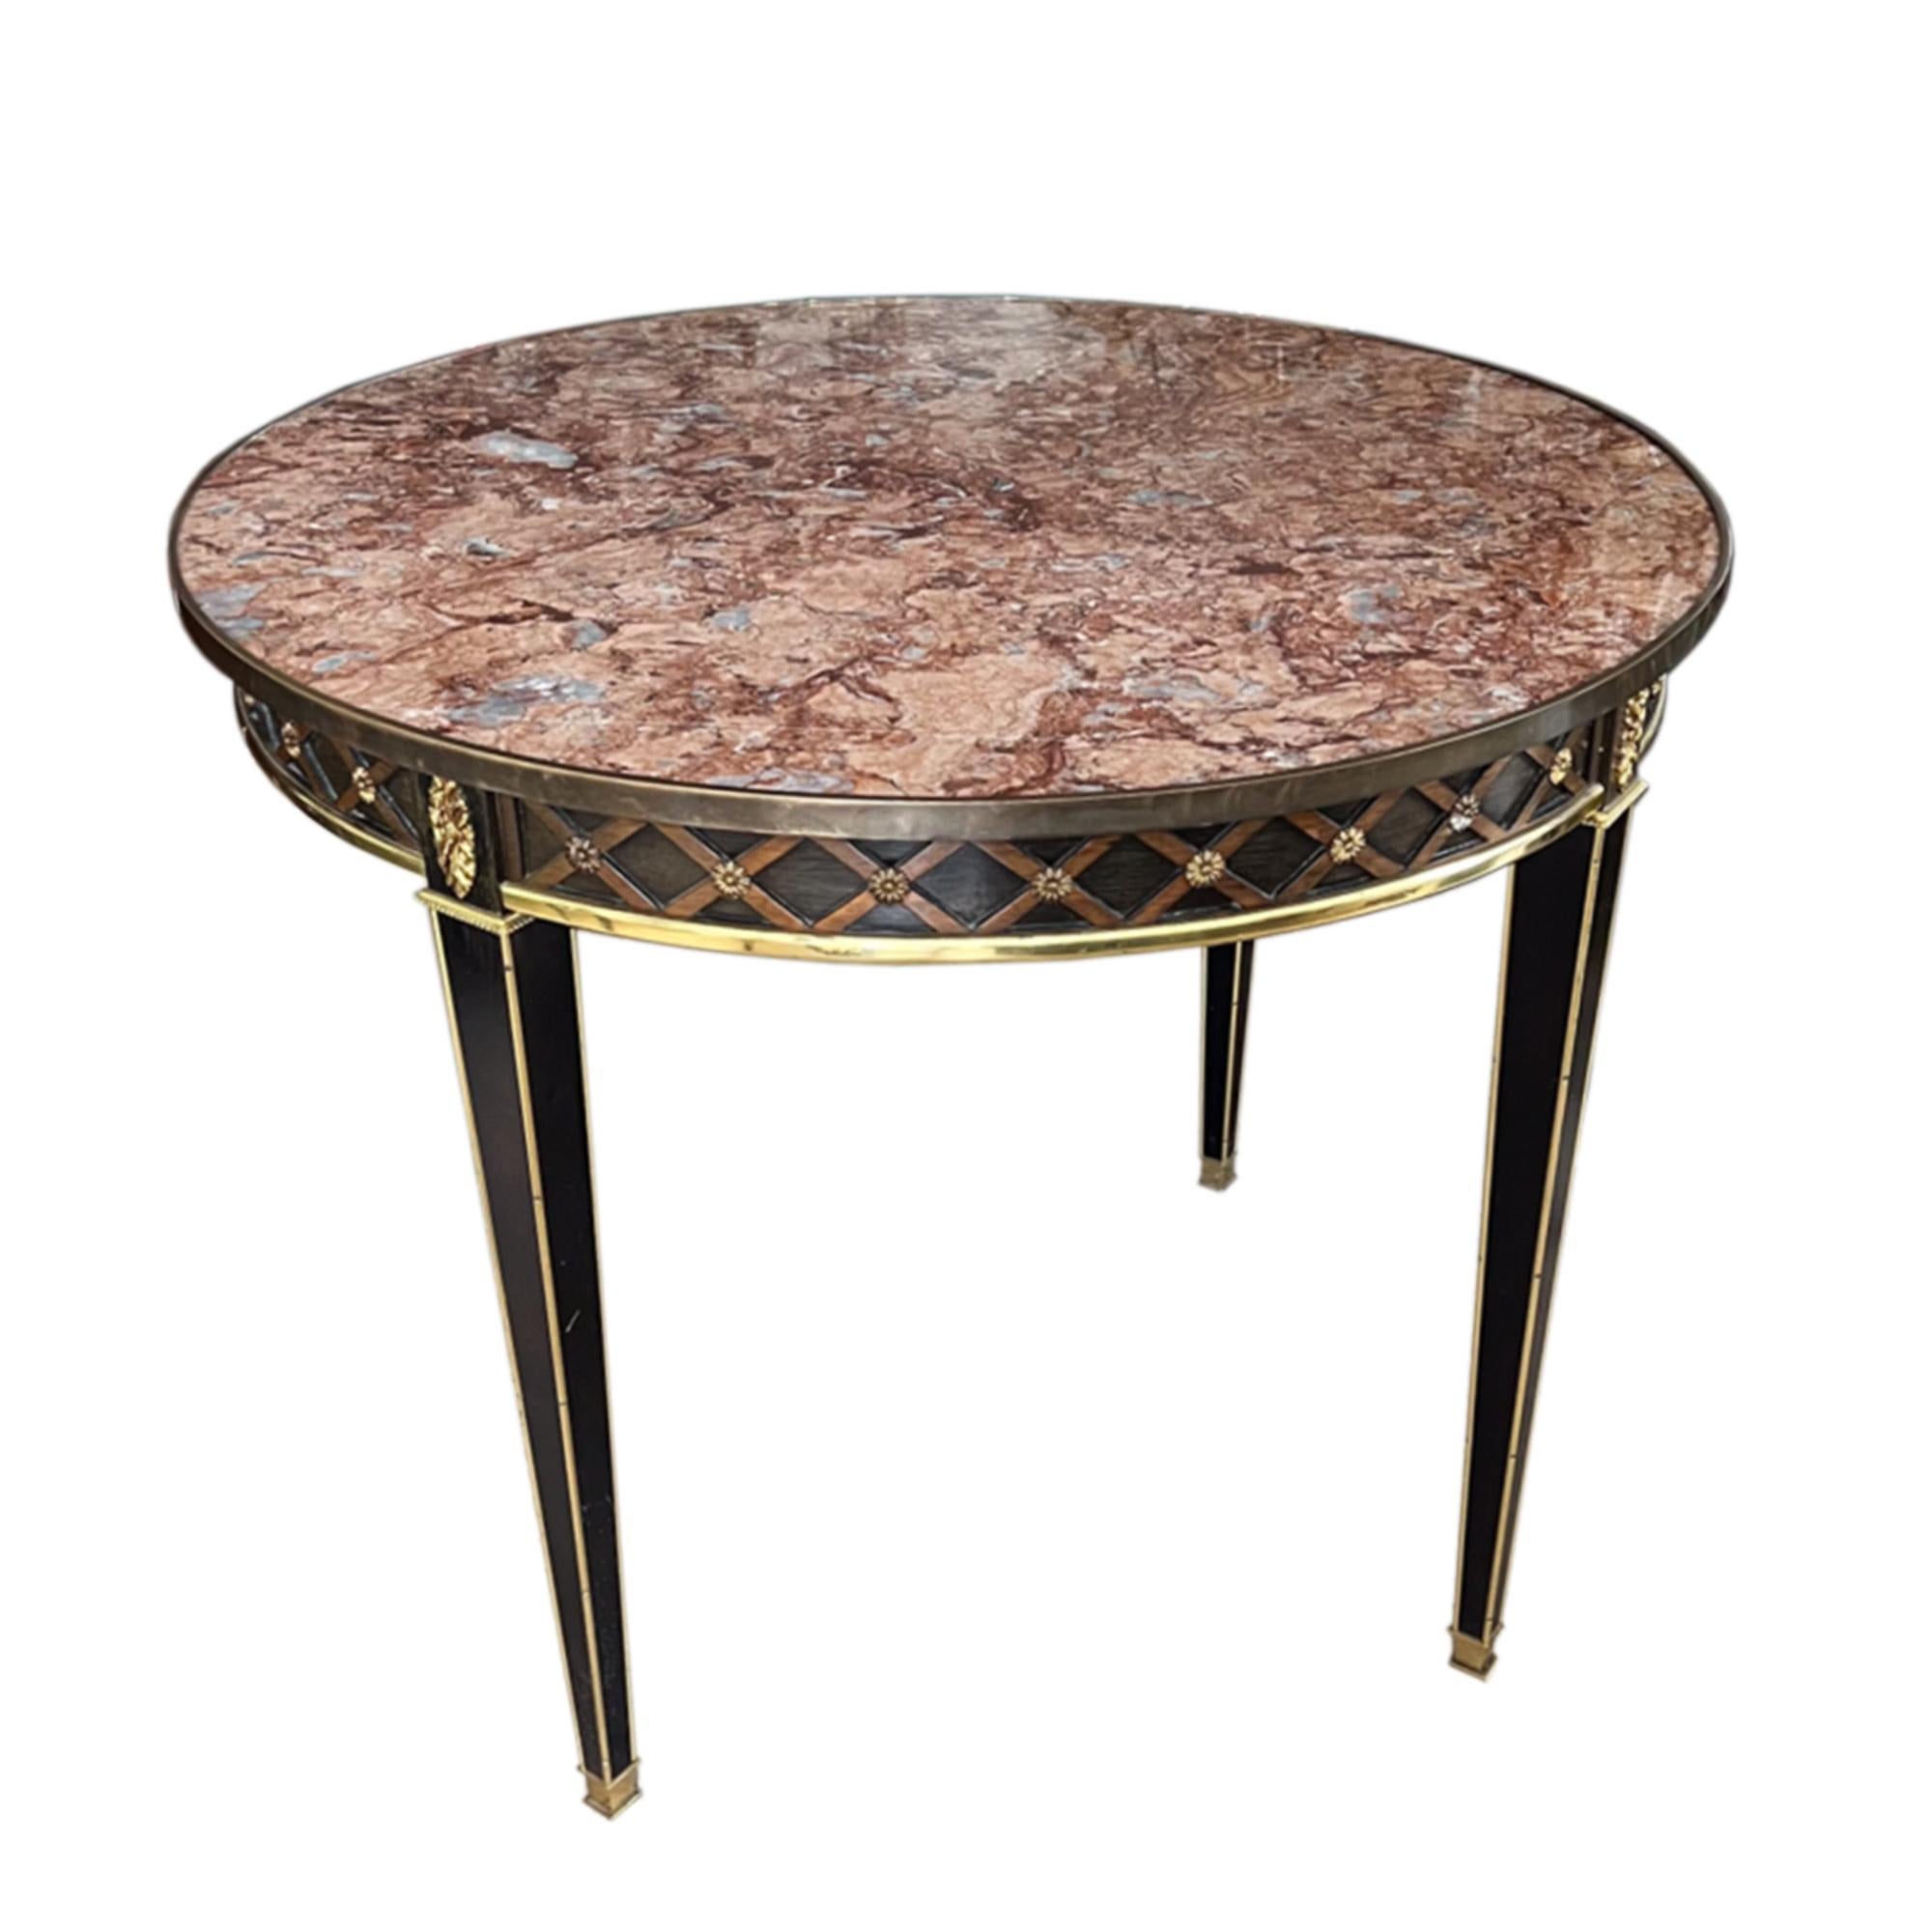 This highly decorative centre table was made in France in the 1930s to a neo classical design. 

It's made with ebonised wood and a beautiful marble top - with brass detailing and a harlequin relief frieze. 

Please take a look at all our pictures. 